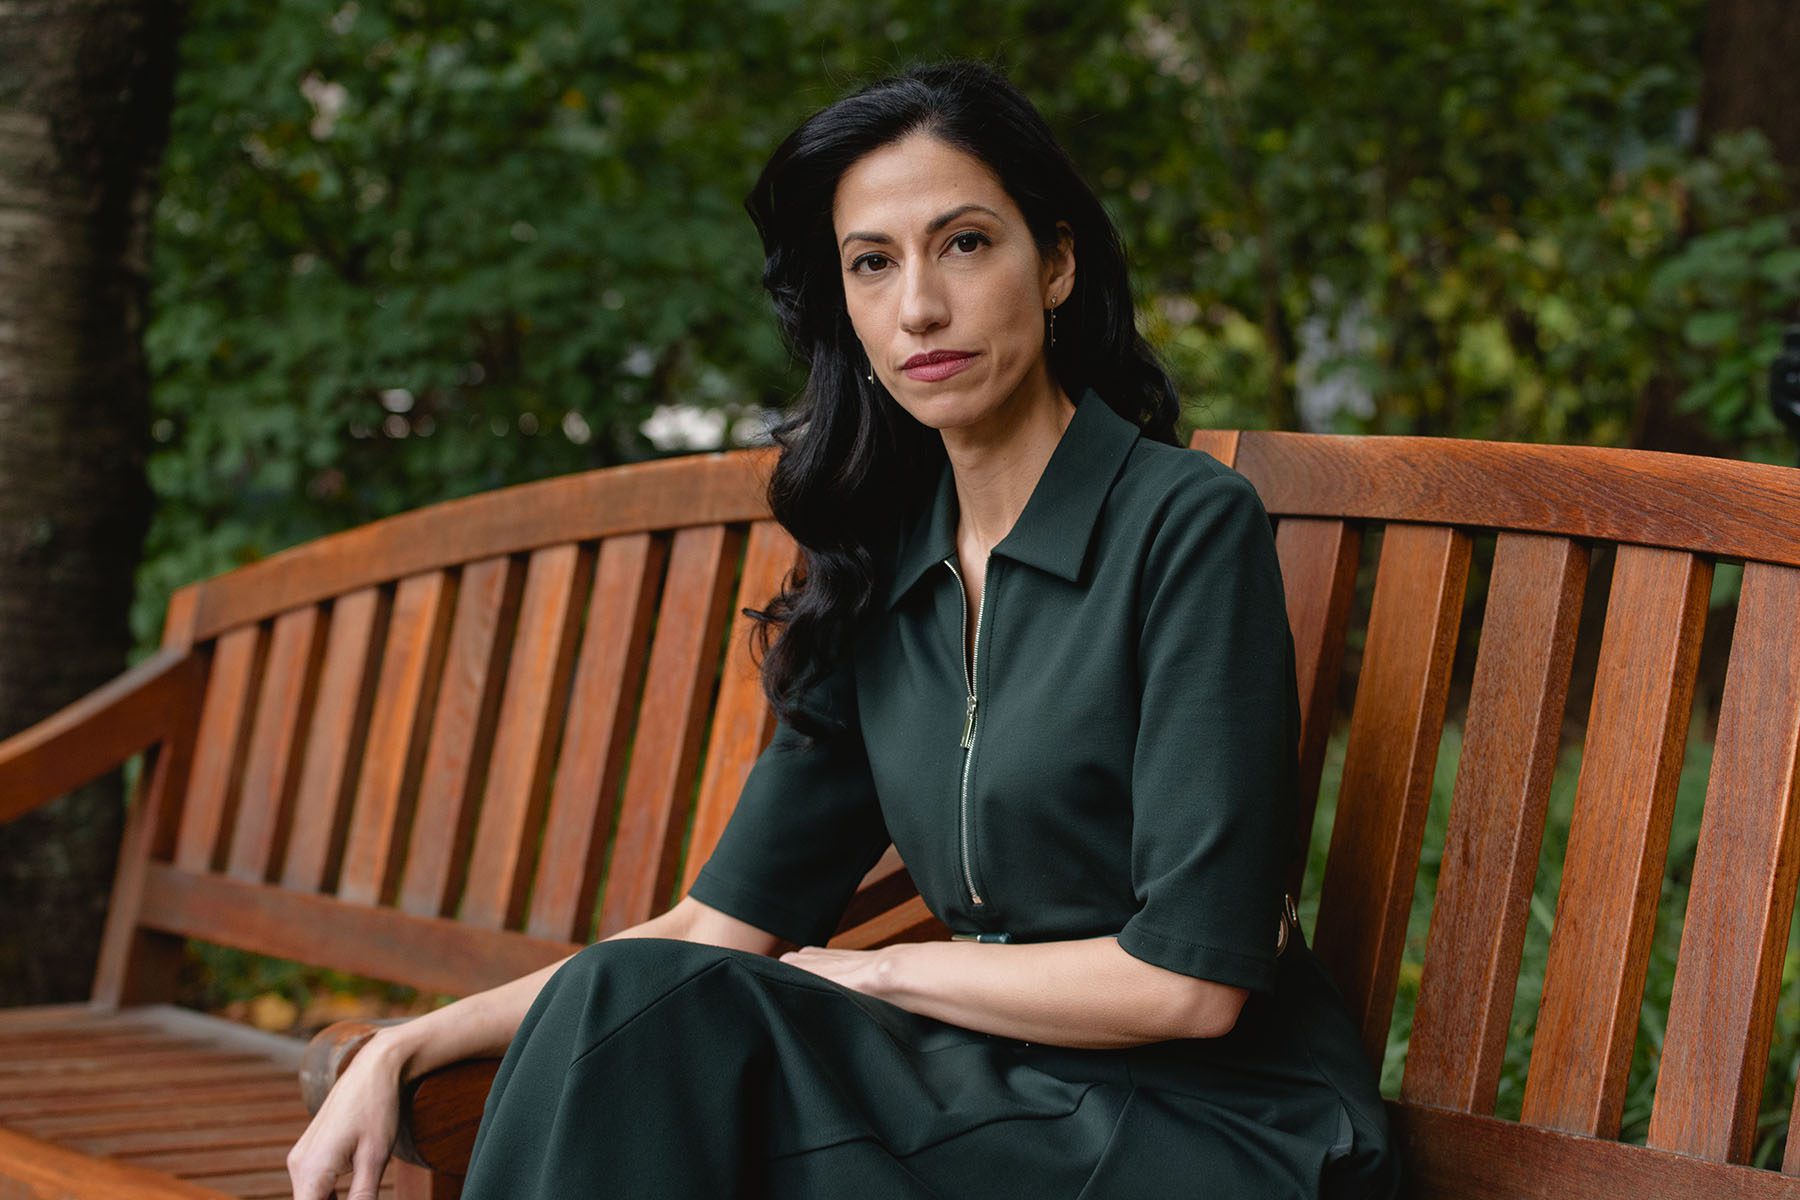 Huma Abedin poses for a portrait at a park in New York.